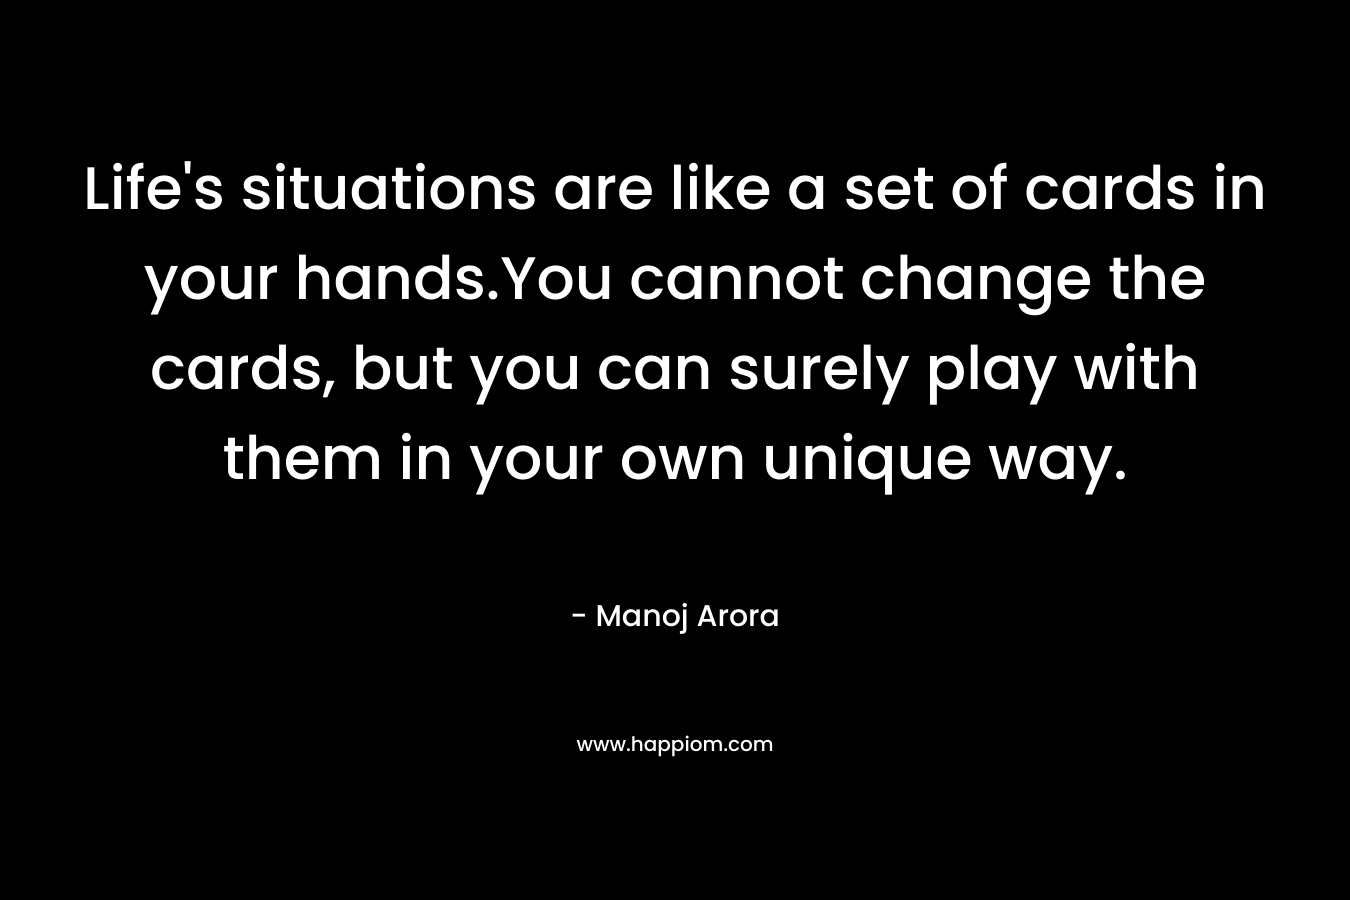 Life's situations are like a set of cards in your hands.You cannot change the cards, but you can surely play with them in your own unique way.